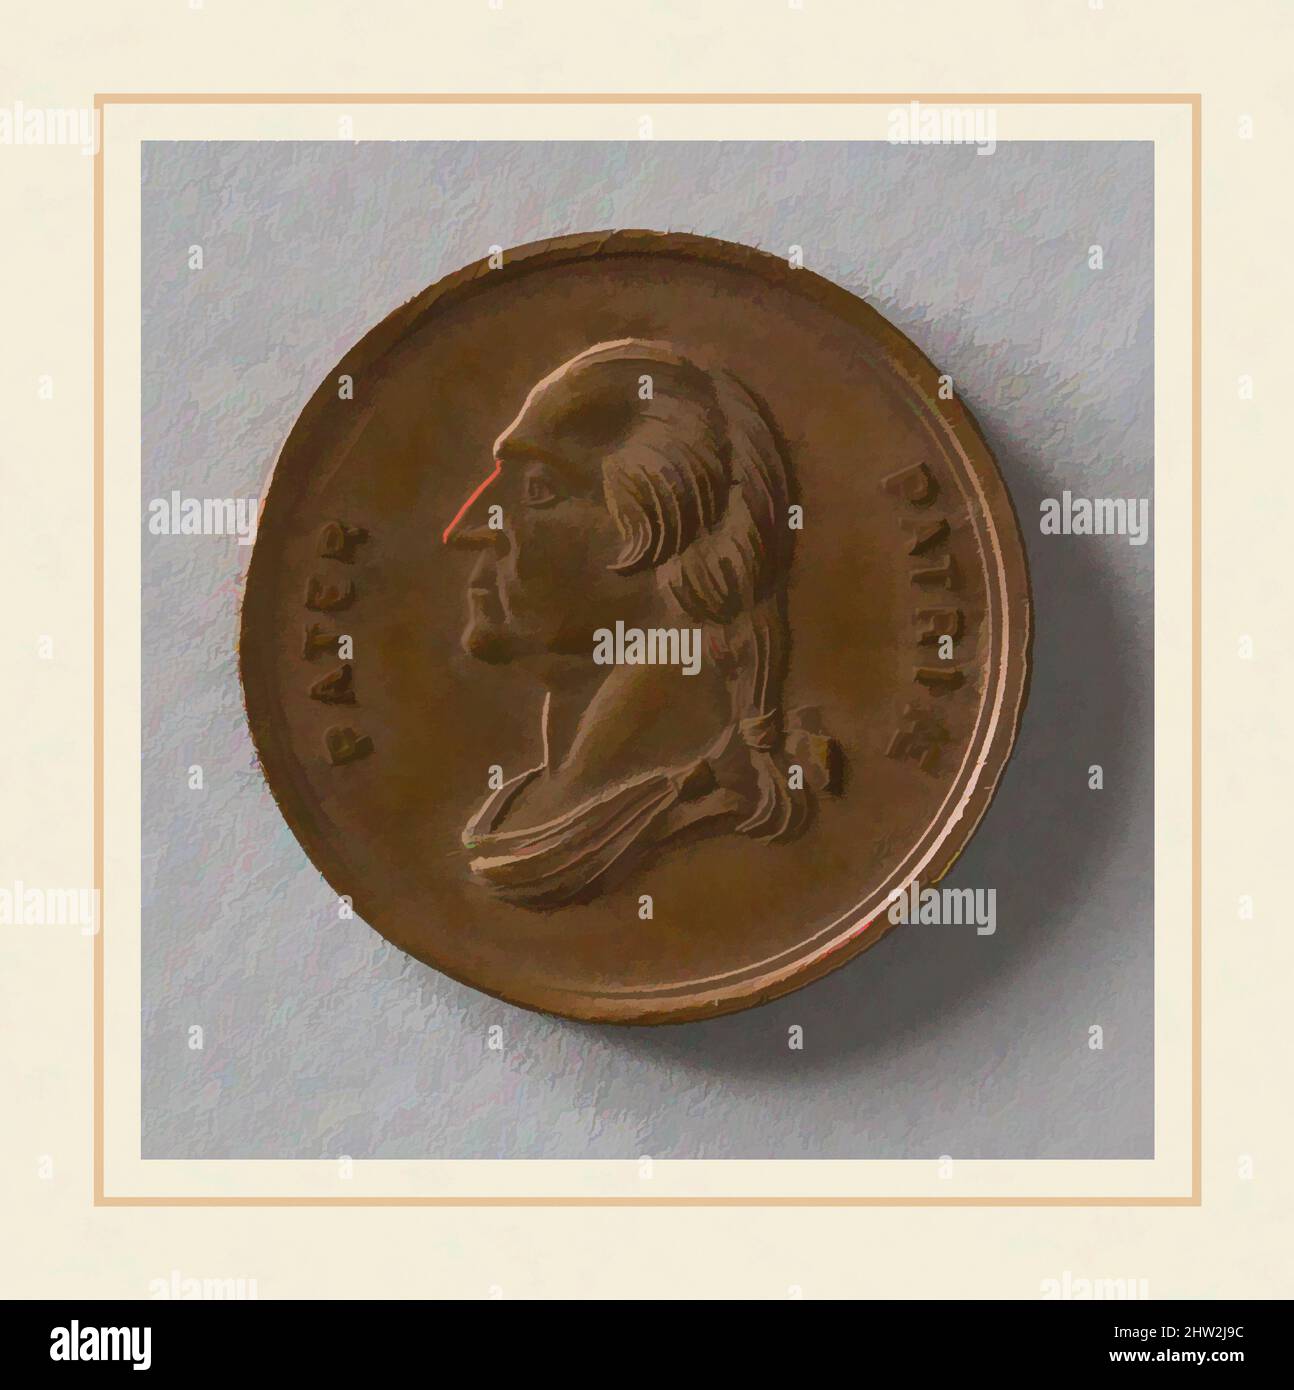 Art inspired by Medal, 1859, Probably gilt copper, Diam. 13/16 in. (2.1 cm), Metal, Classic works modernized by Artotop with a splash of modernity. Shapes, color and value, eye-catching visual impact on art. Emotions through freedom of artworks in a contemporary way. A timeless message pursuing a wildly creative new direction. Artists turning to the digital medium and creating the Artotop NFT Stock Photo